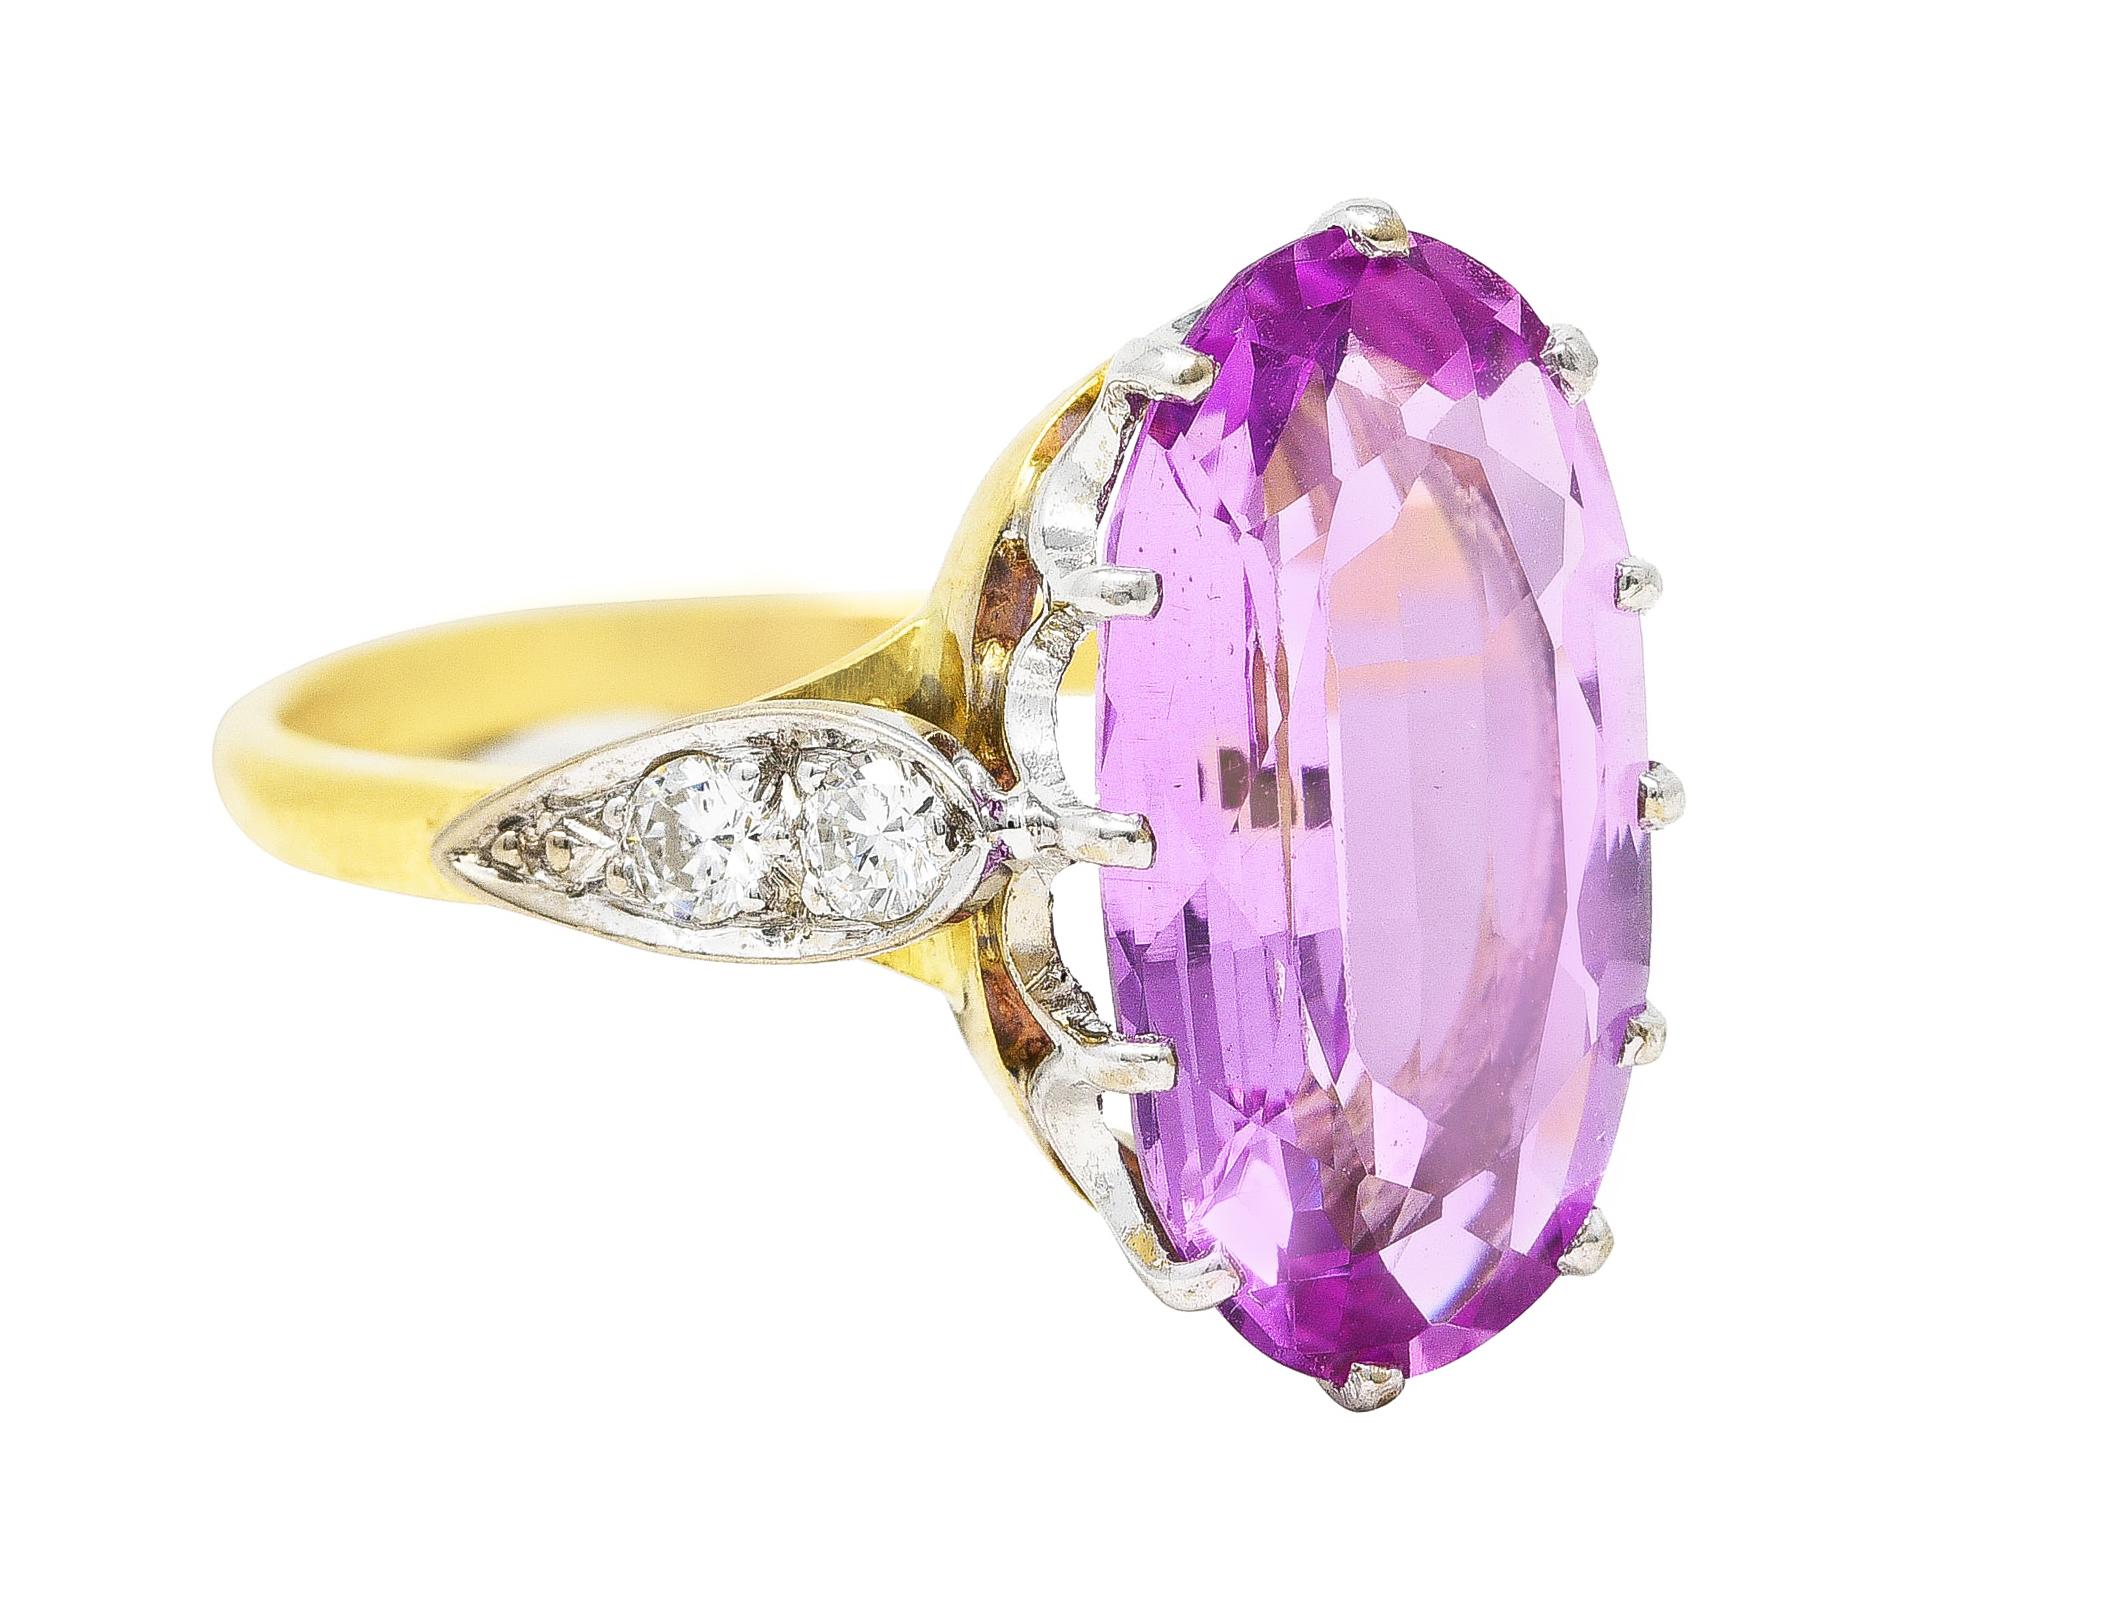 Featuring an elongated oval cut imperial topaz weighing approximately 5.20 carats. Transparent violetish pink in color - strong saturation. Prong set in a stylized white gold head with a deep scalloped motif. Flanked by white gold navette form